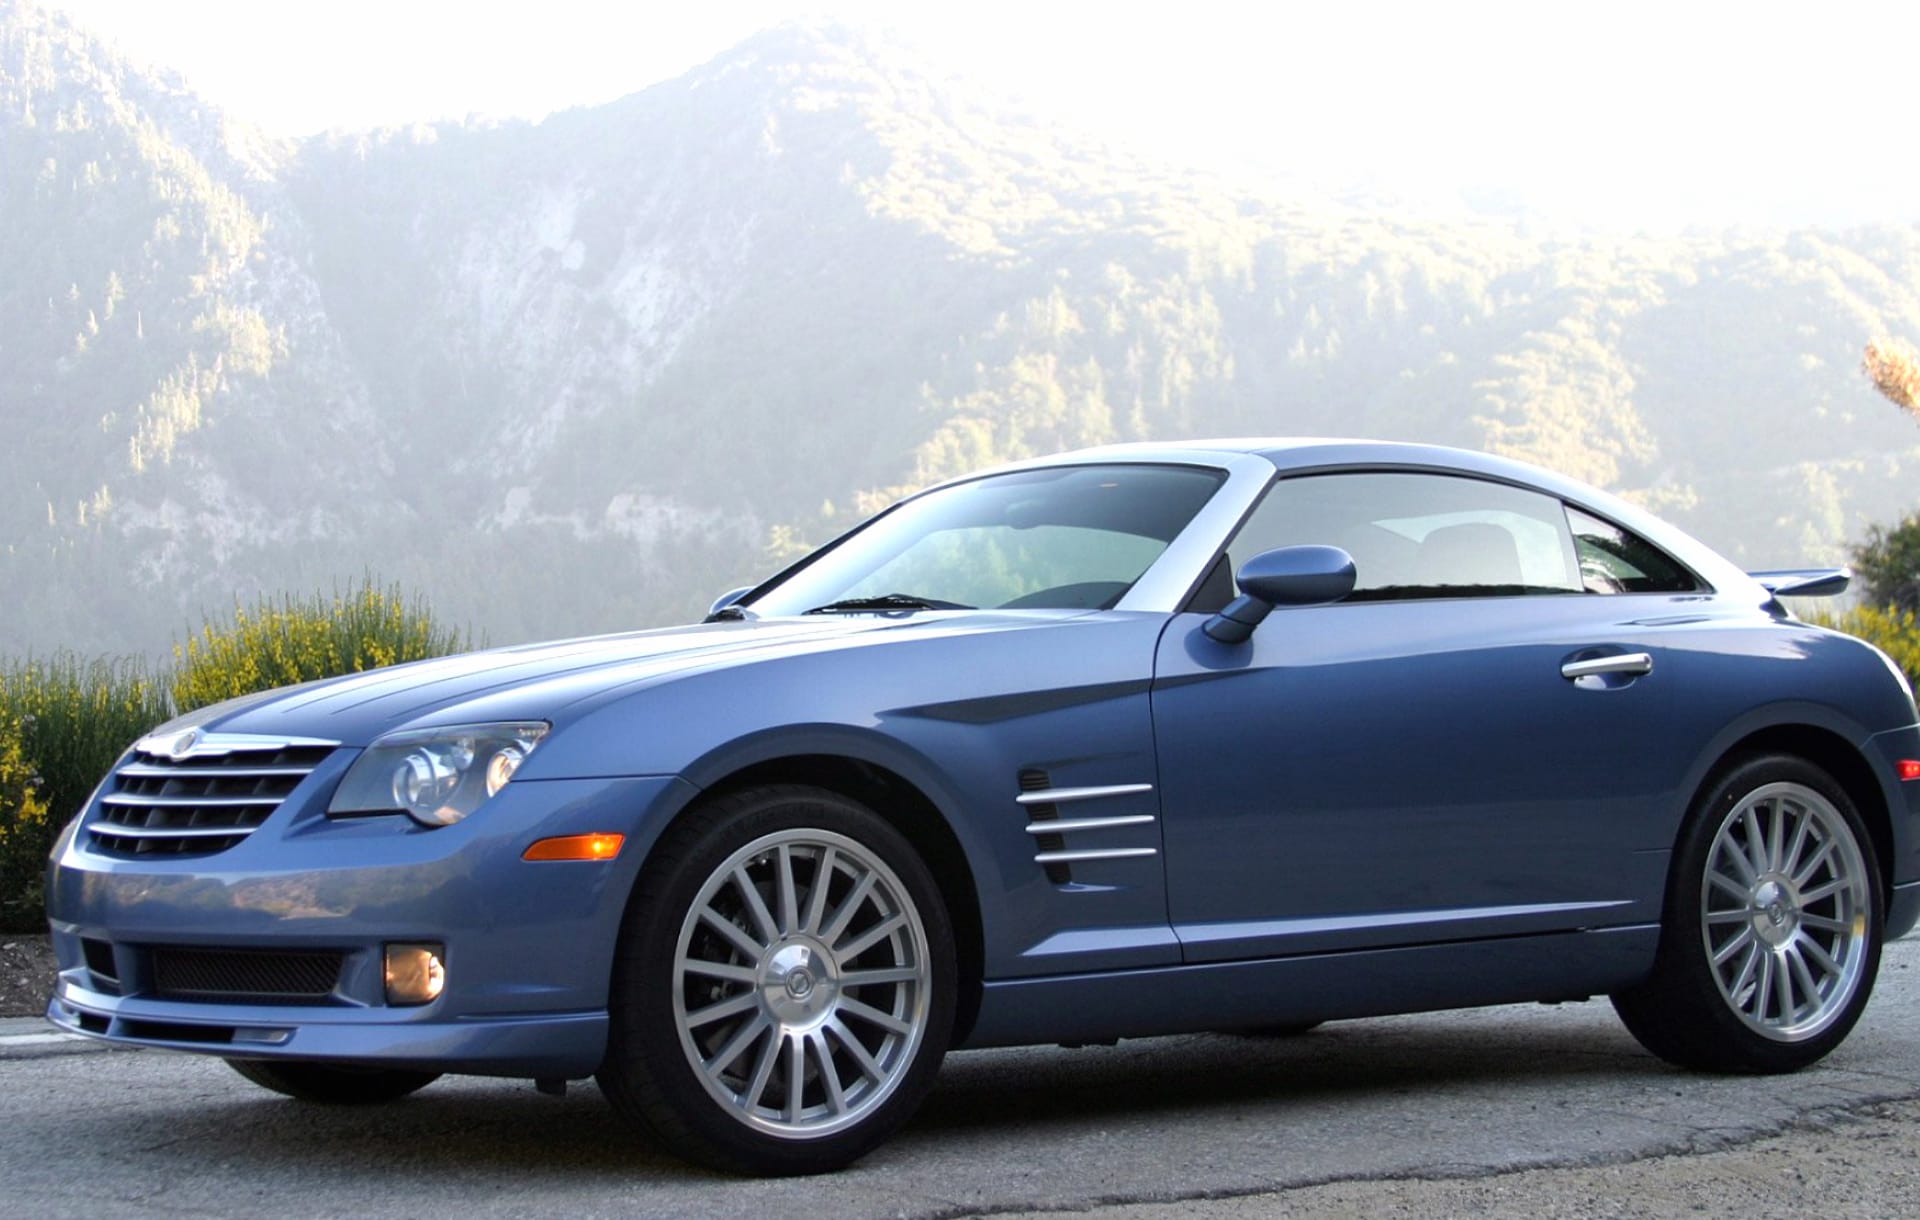 Chrysler Crossfire SRT6 wallpapers HD quality